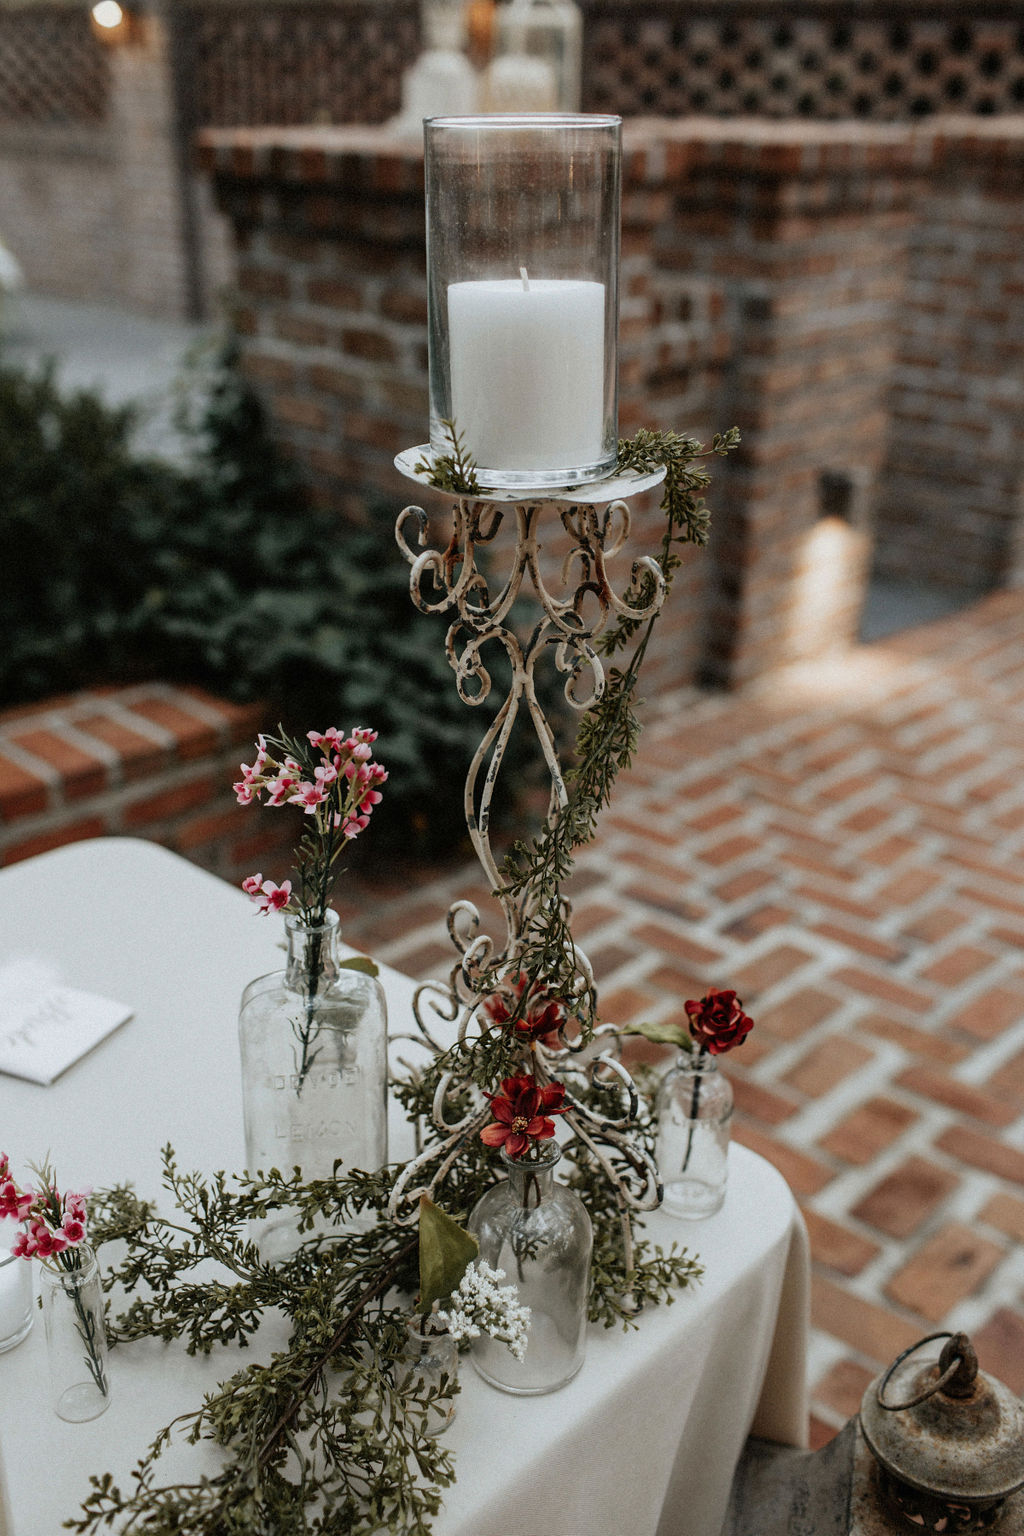 Wedding candle decor: Magical Winter Wedding by Meghan Melia Photography featured on Nashville Bride Guide!